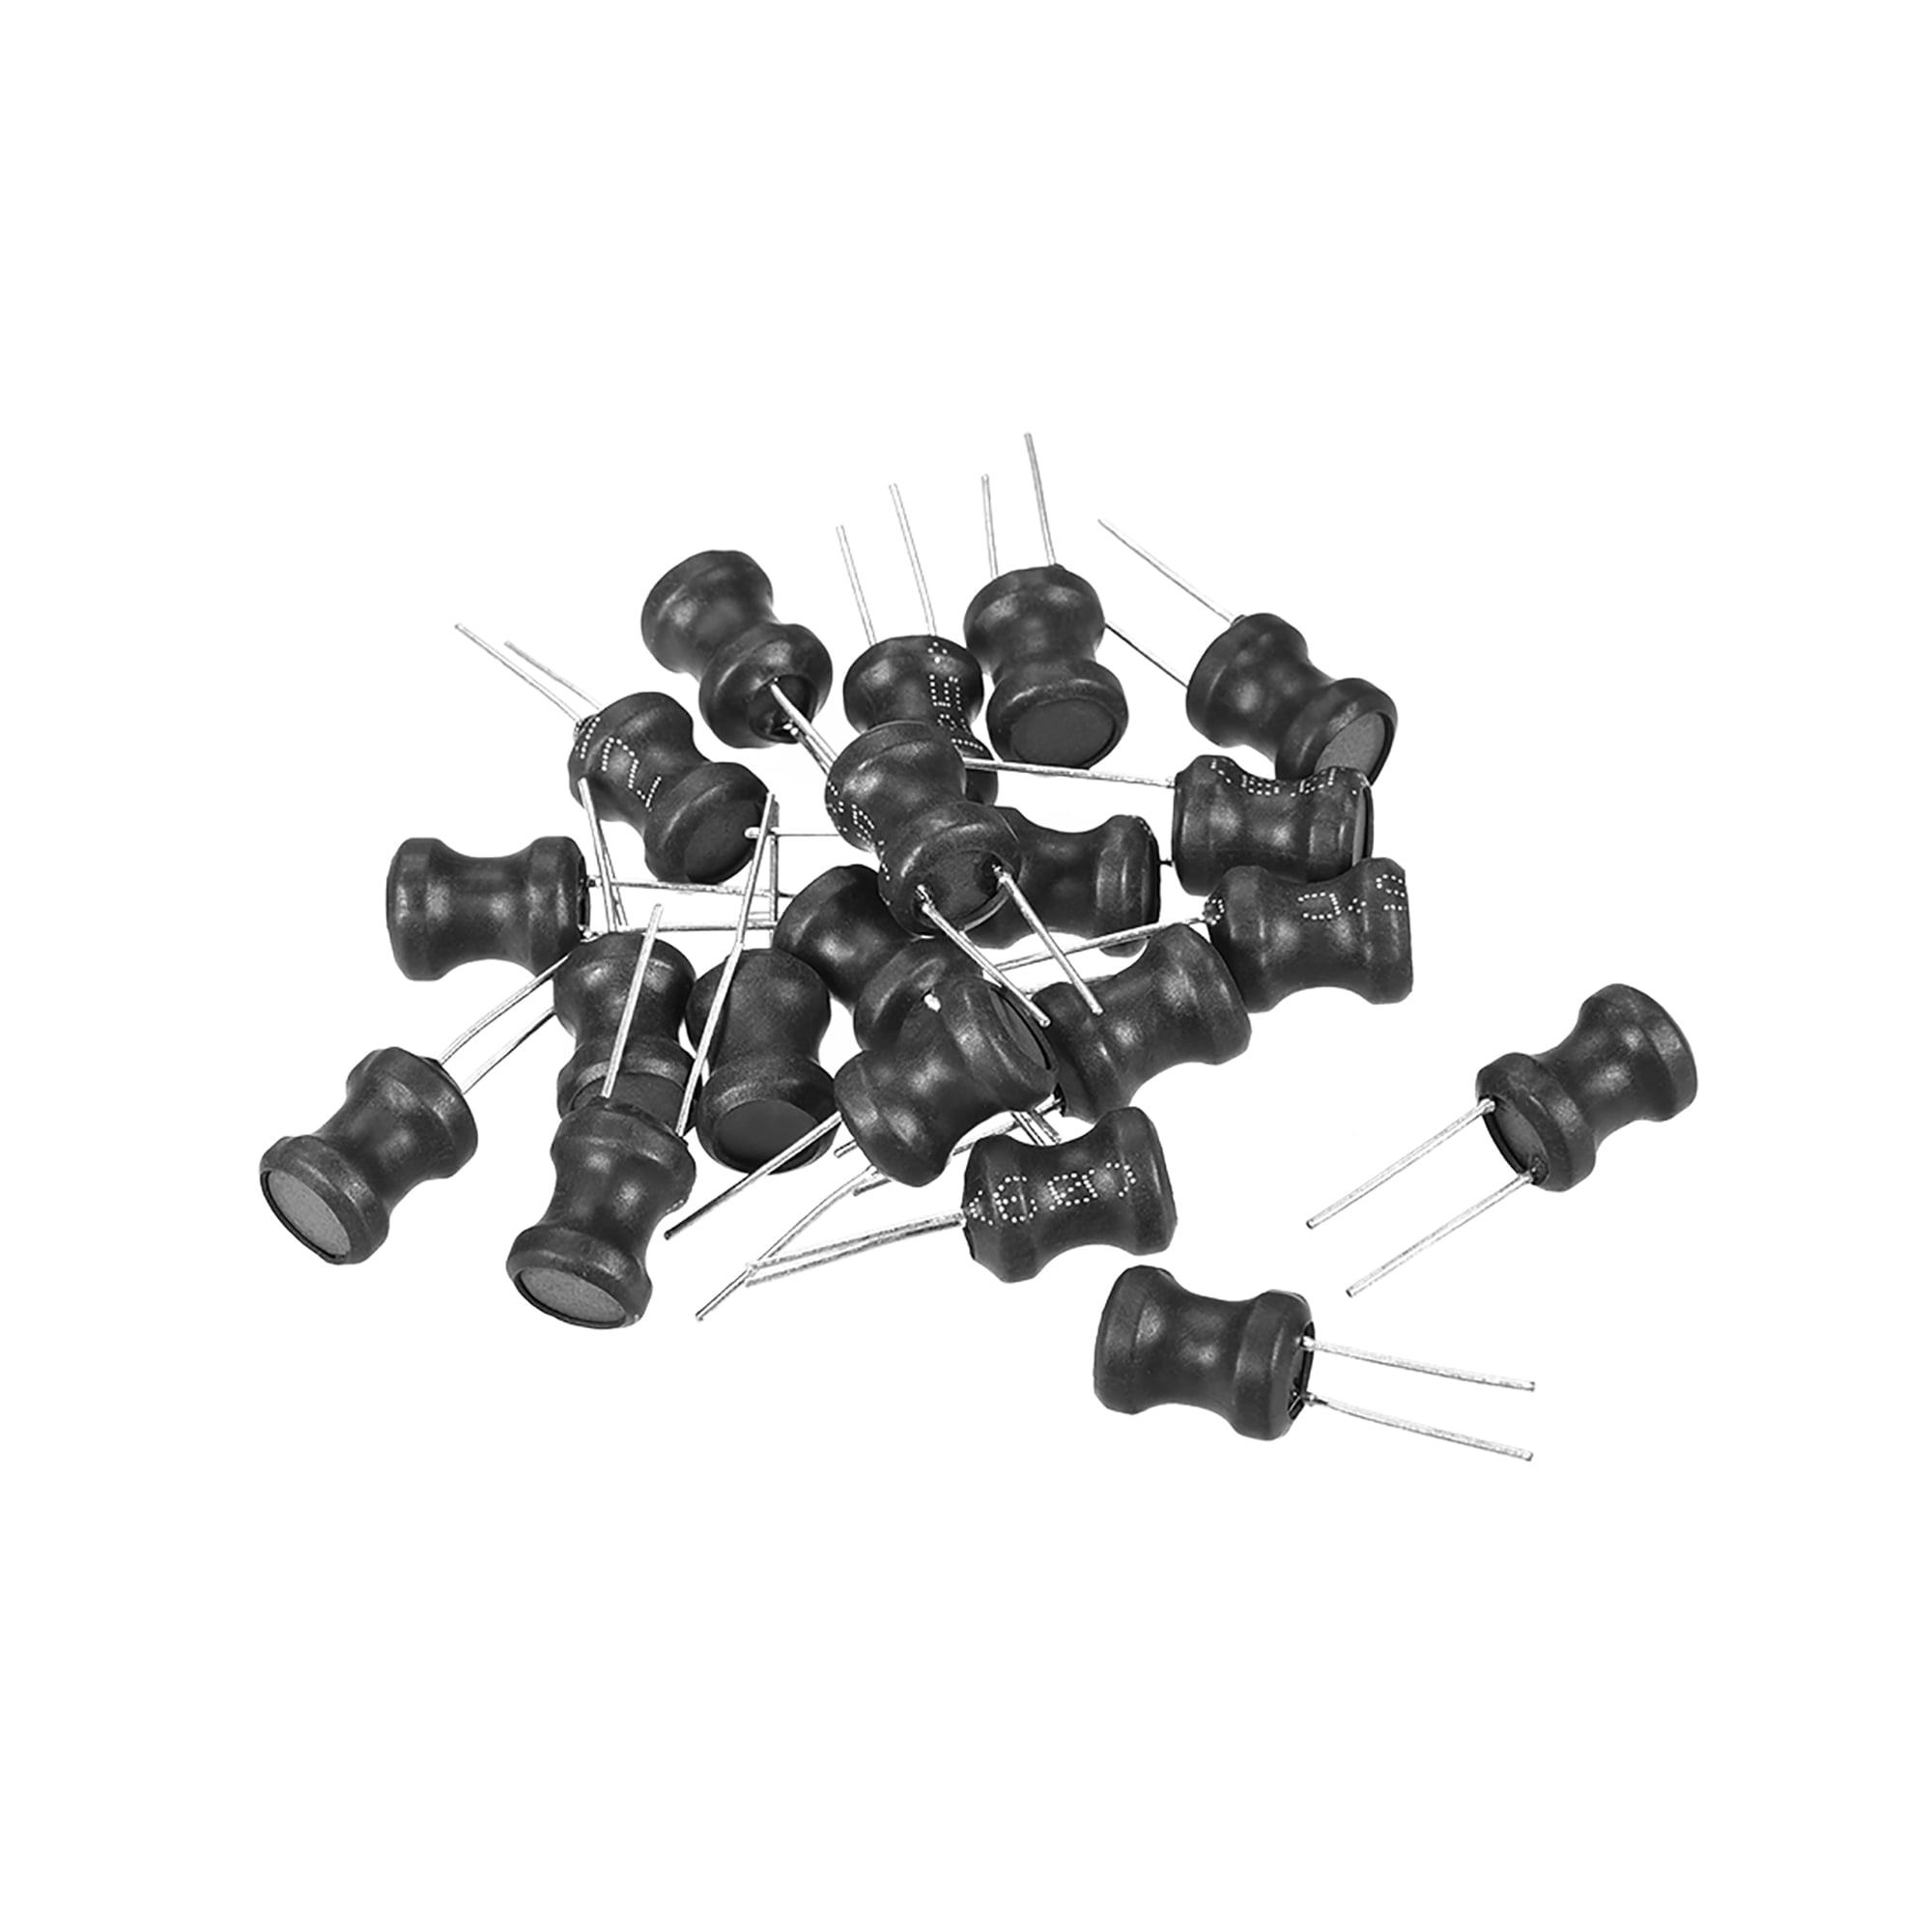 uxcell 10pcs Two Lead 3.3mH 7x10 7mm X 10mm Radial Leaded Power Inductors 20% Tolerance 